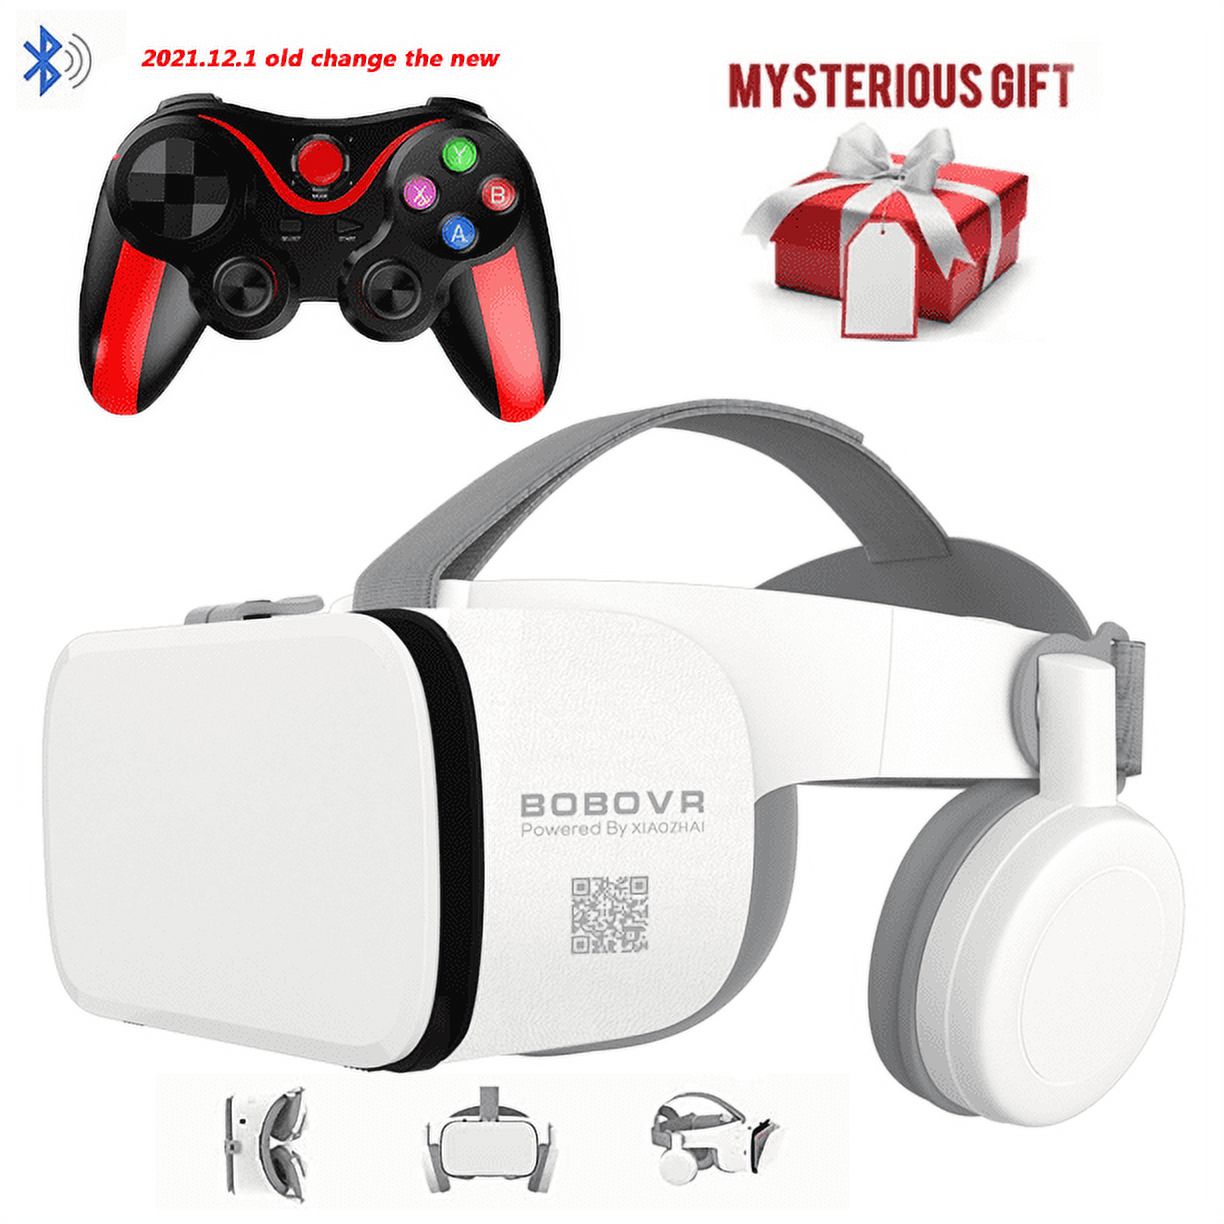 Upgraded version 2022 Virtual Reality 3D VR Headset Smart Glasses, with Wireless Remote Control, VR Glasses for IMAX Movies & Play Games, Compatible for Android iOS System, with Mystery Gift - image 1 of 9